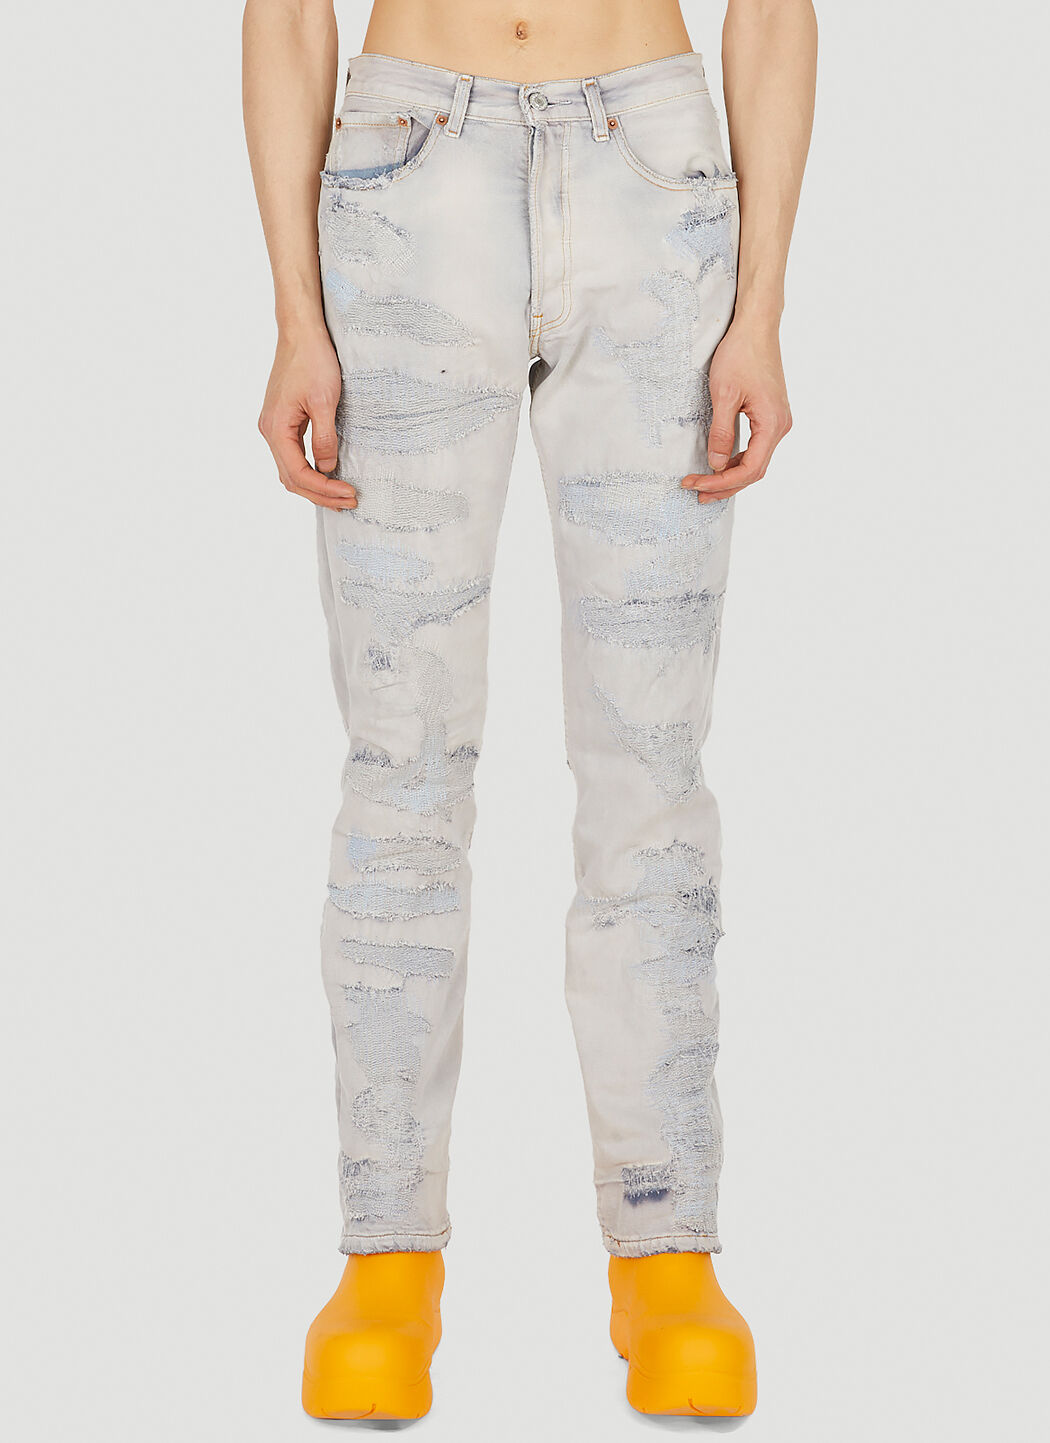 NOTSONORMAL Destroyed Jeans Yellow nsm0348025